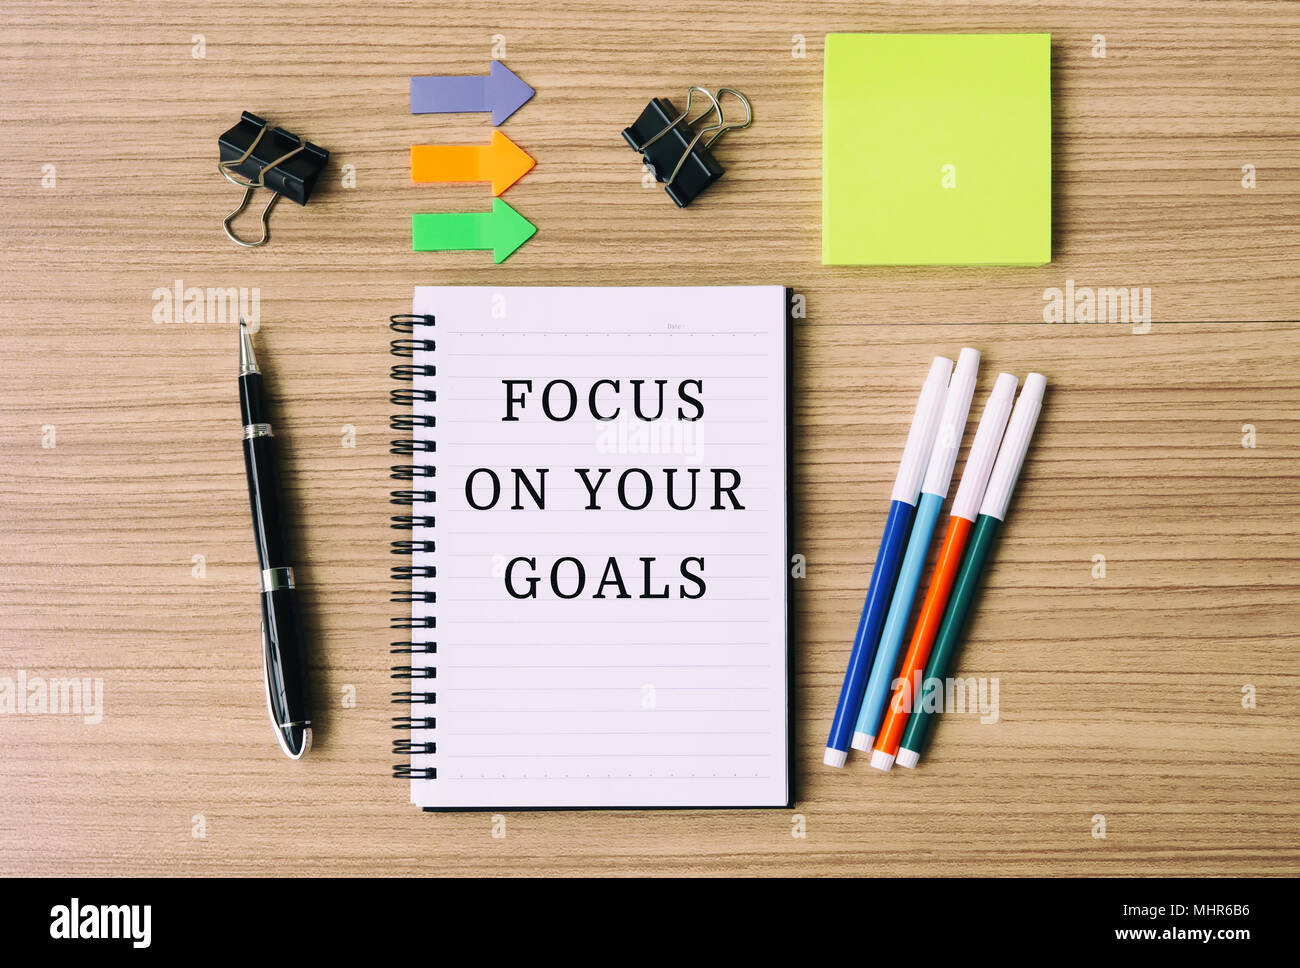 Inspirational quote- Focus on your goals. Retro style. Stock Photo